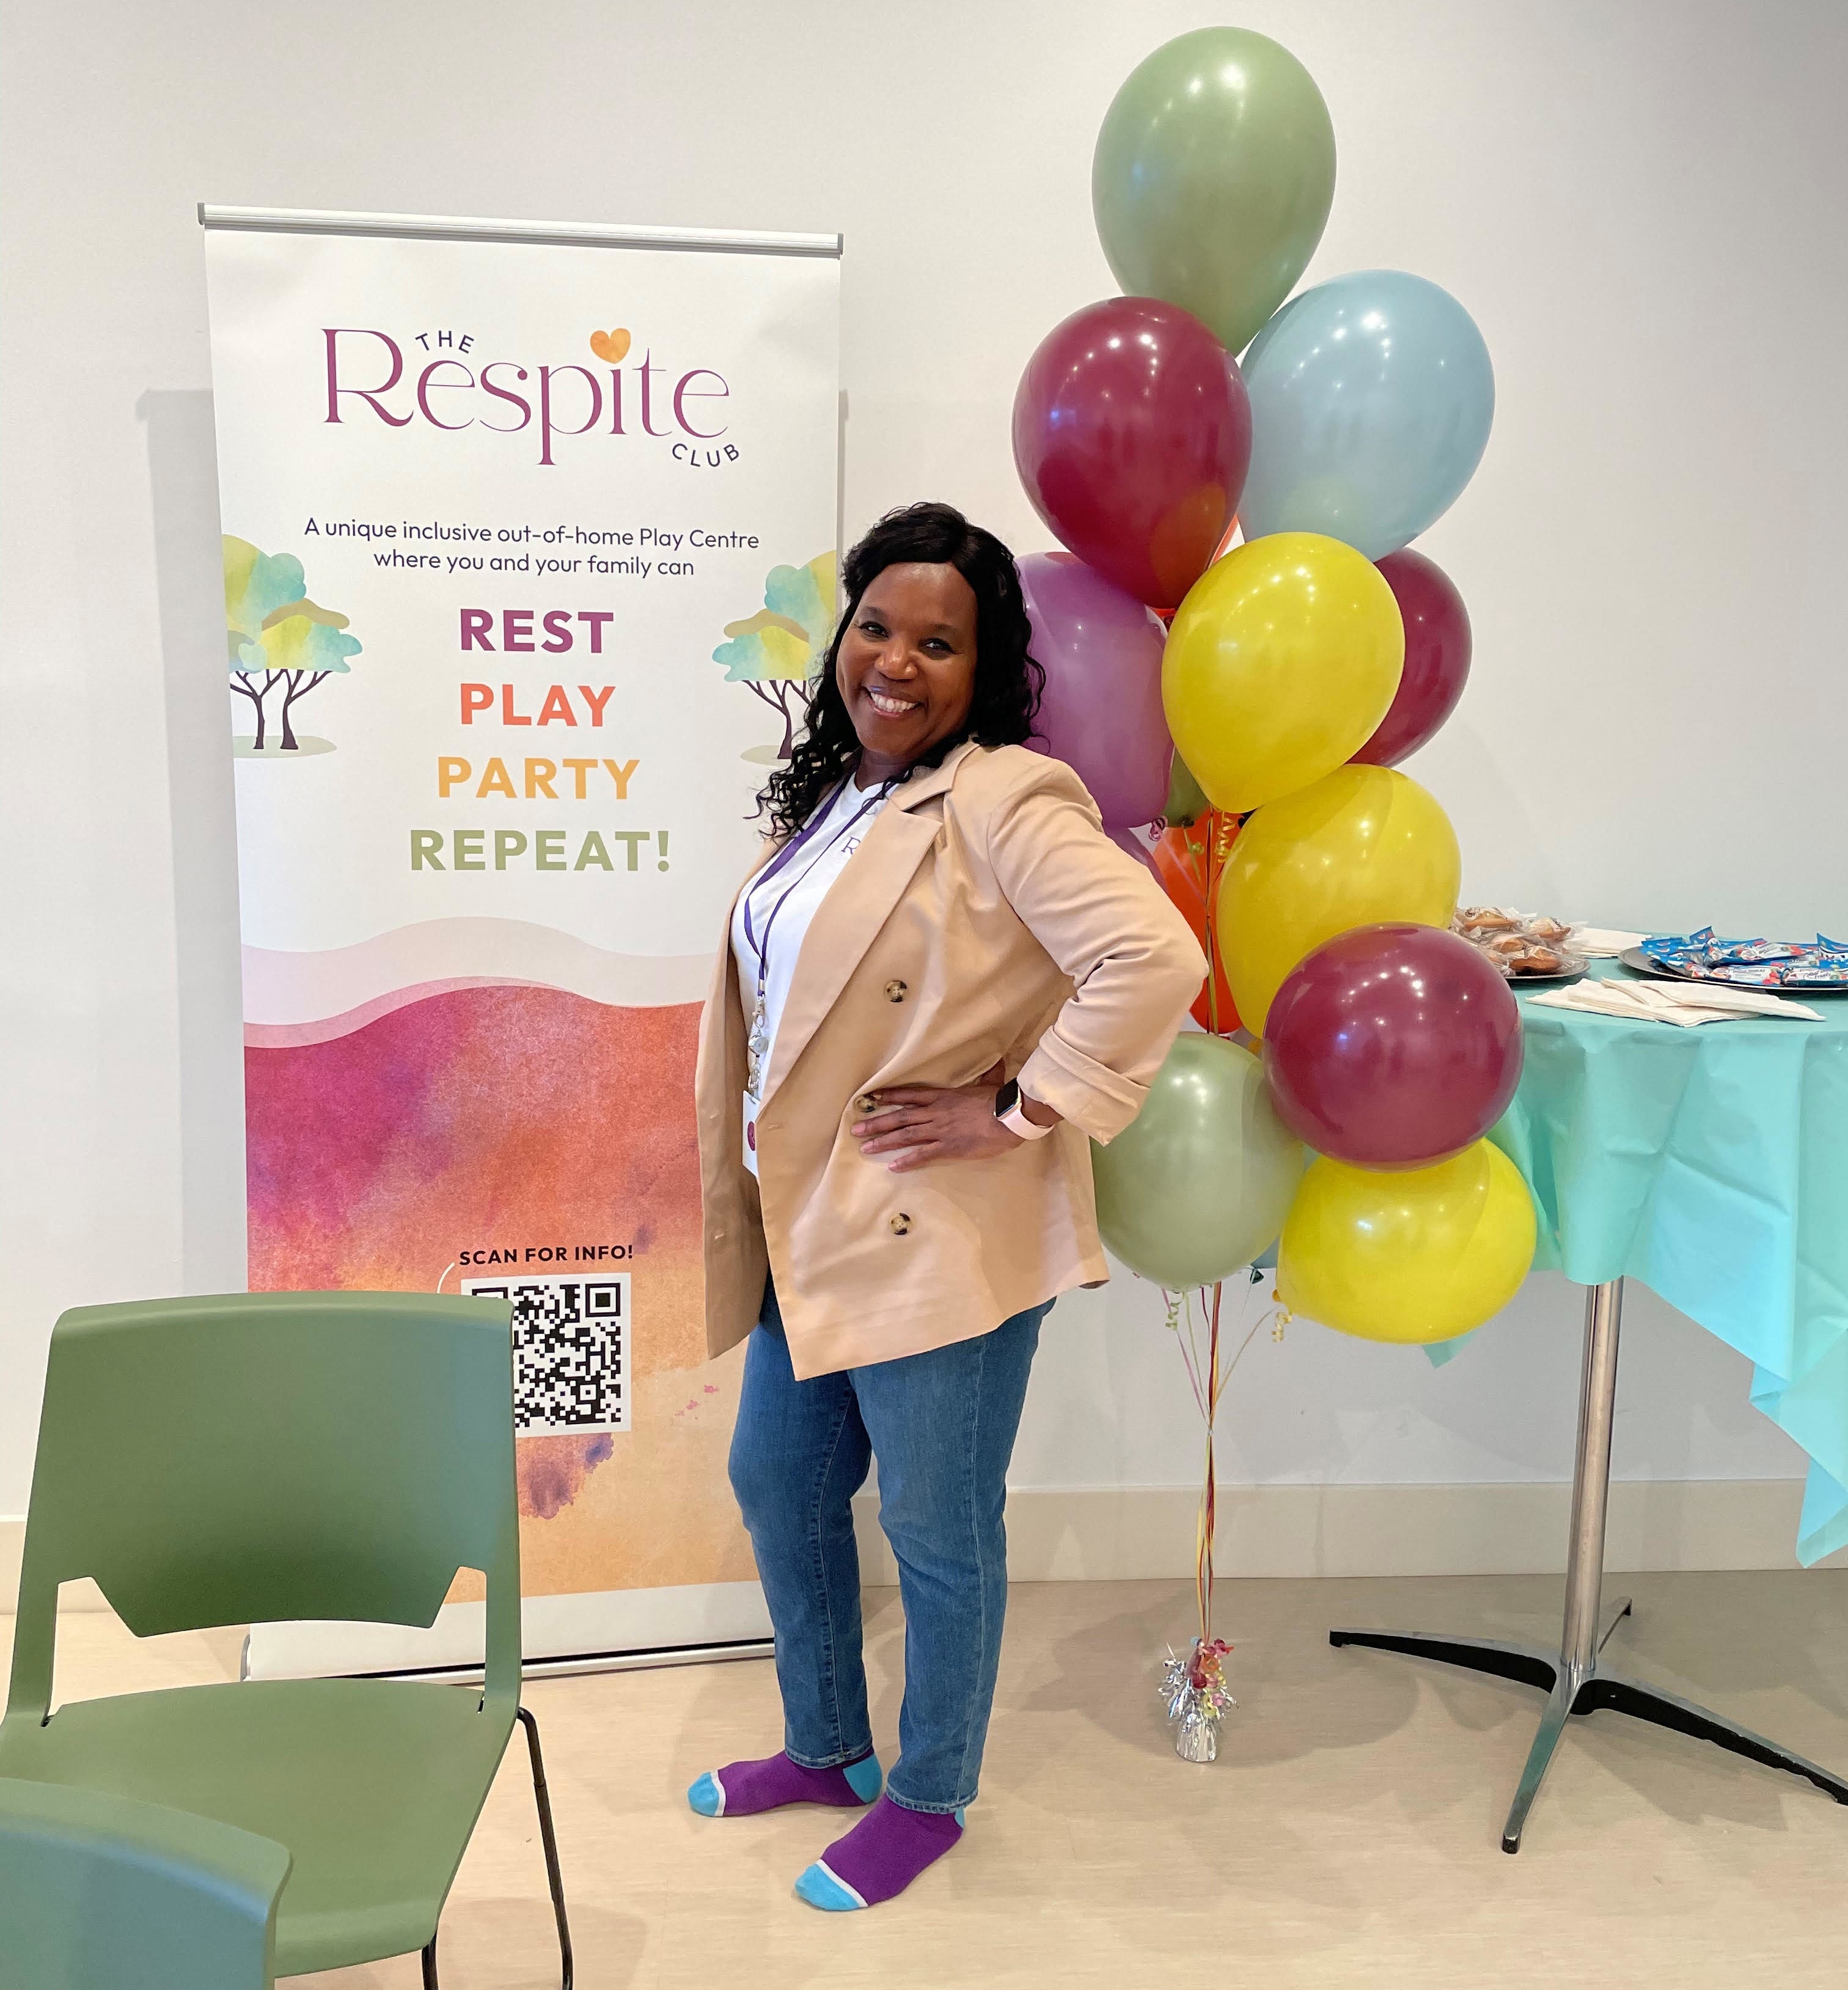 Woman posing with hand on hip, smiling, standing by balloons and a sign for The Respite Club. She wears a blazer and jeans